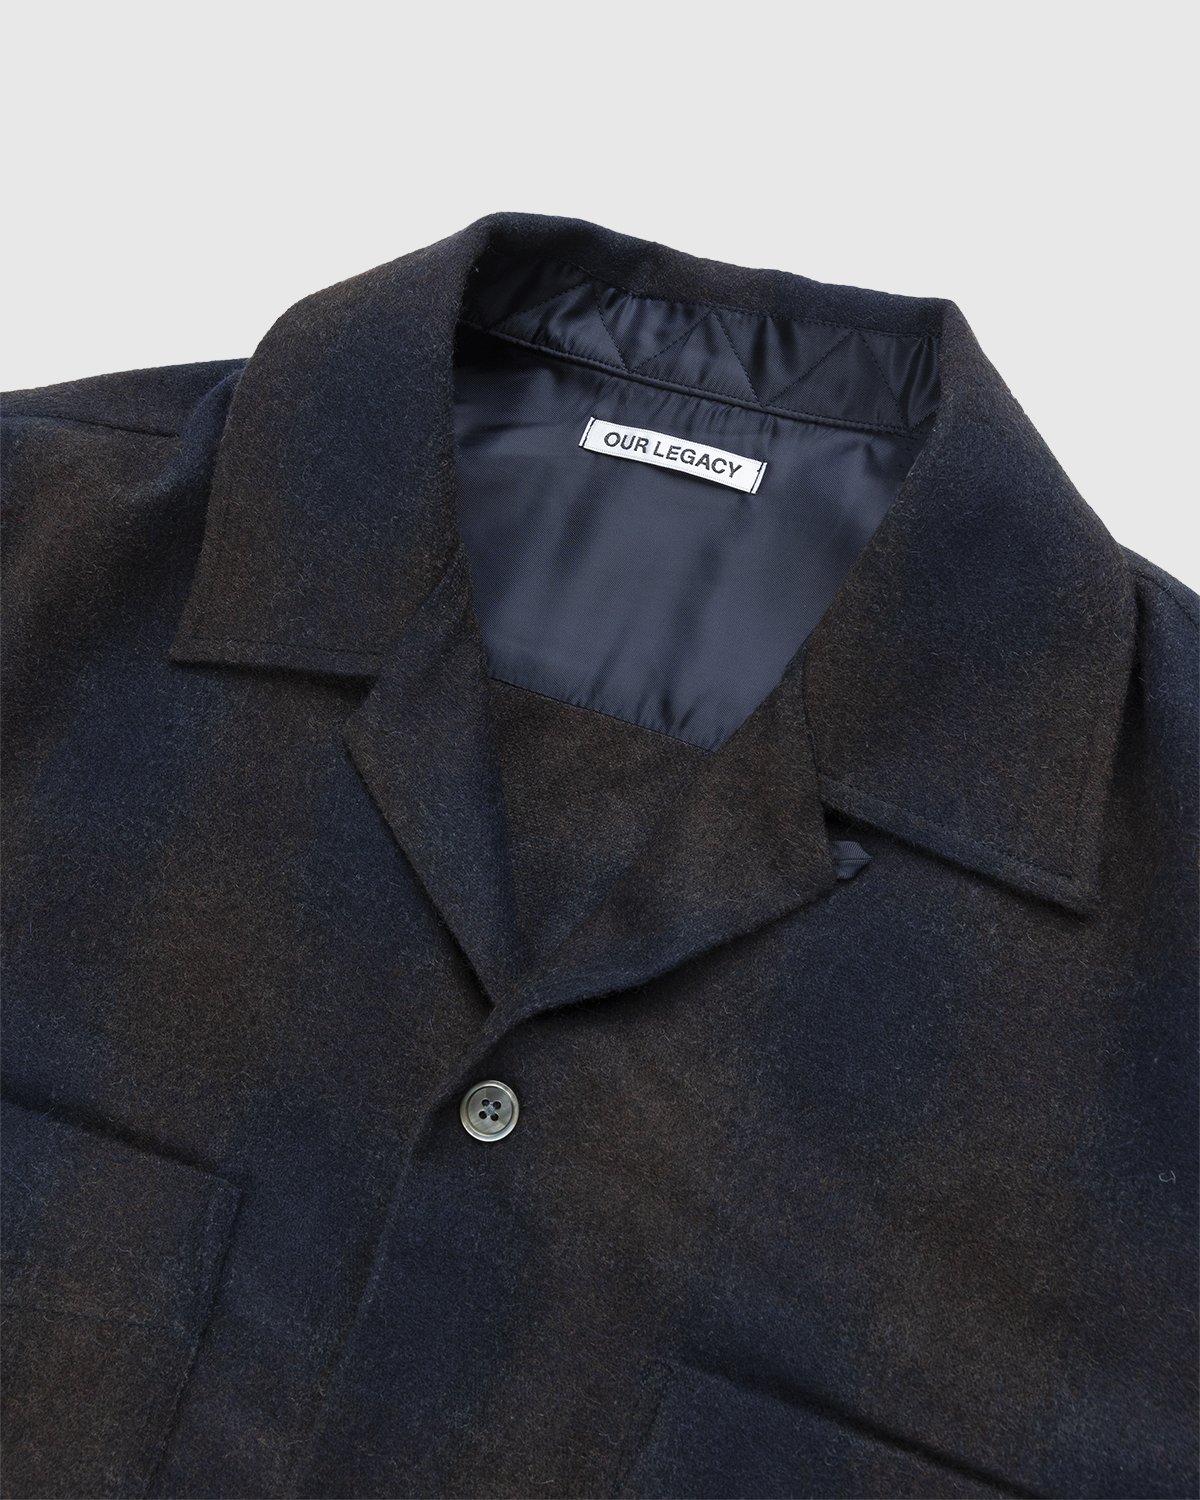 Our Legacy - Heusen Shirt Navy Shadow Check - Clothing - Blue - Image 3